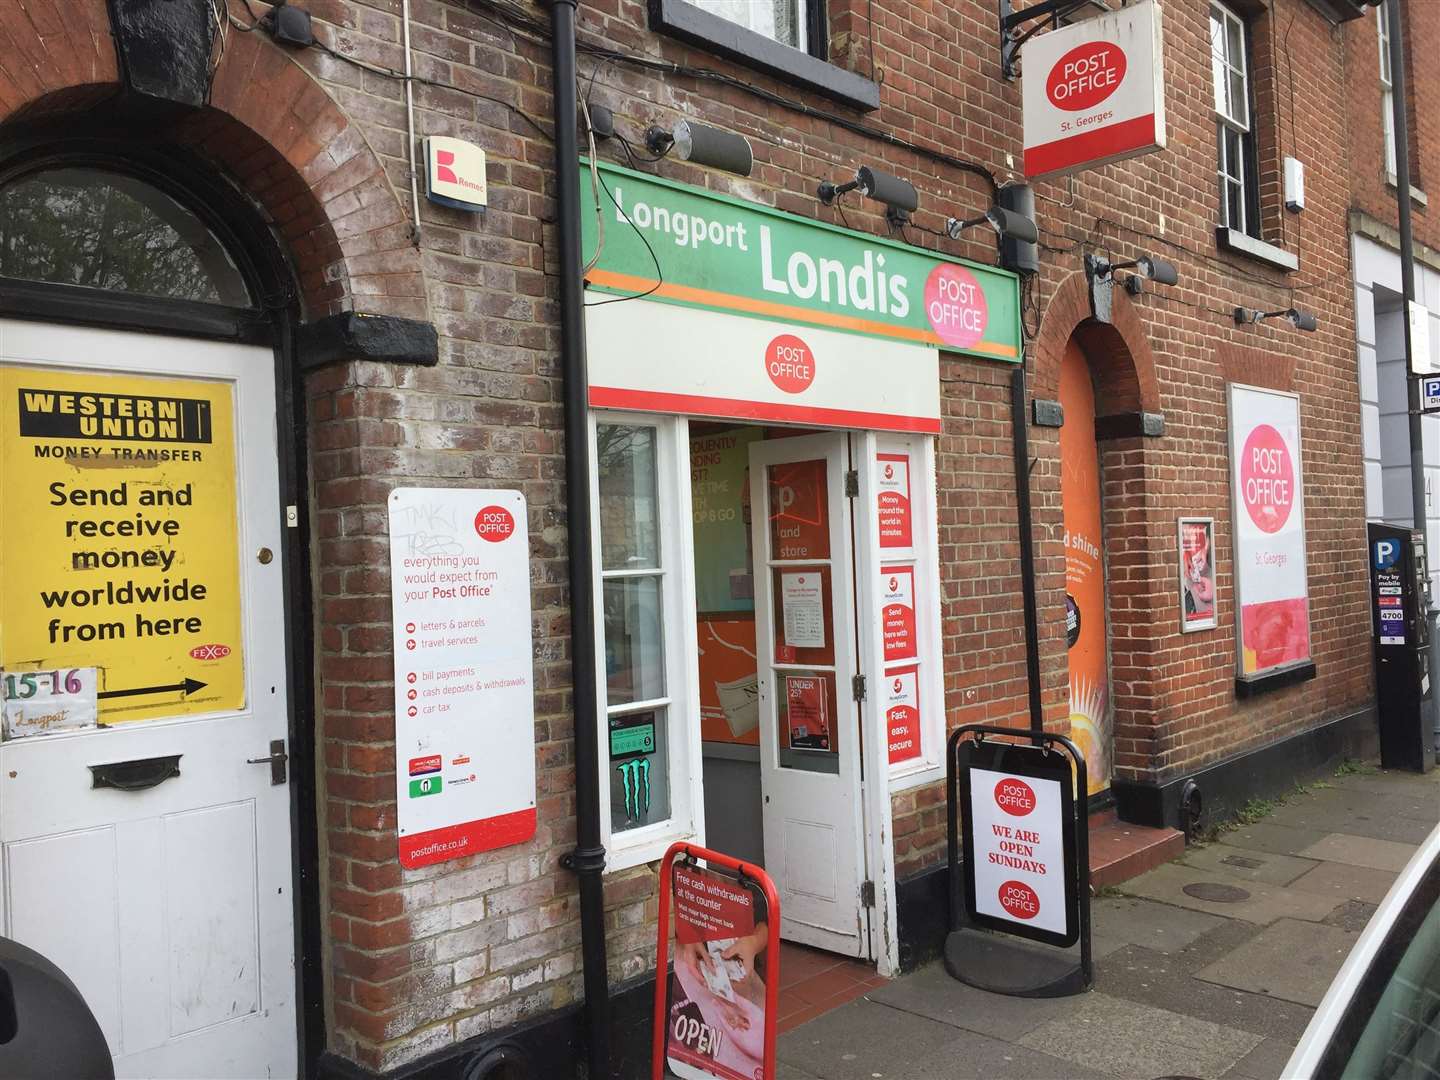 AK Convenience in Longport, Canterbury, has given up its alcohol licence